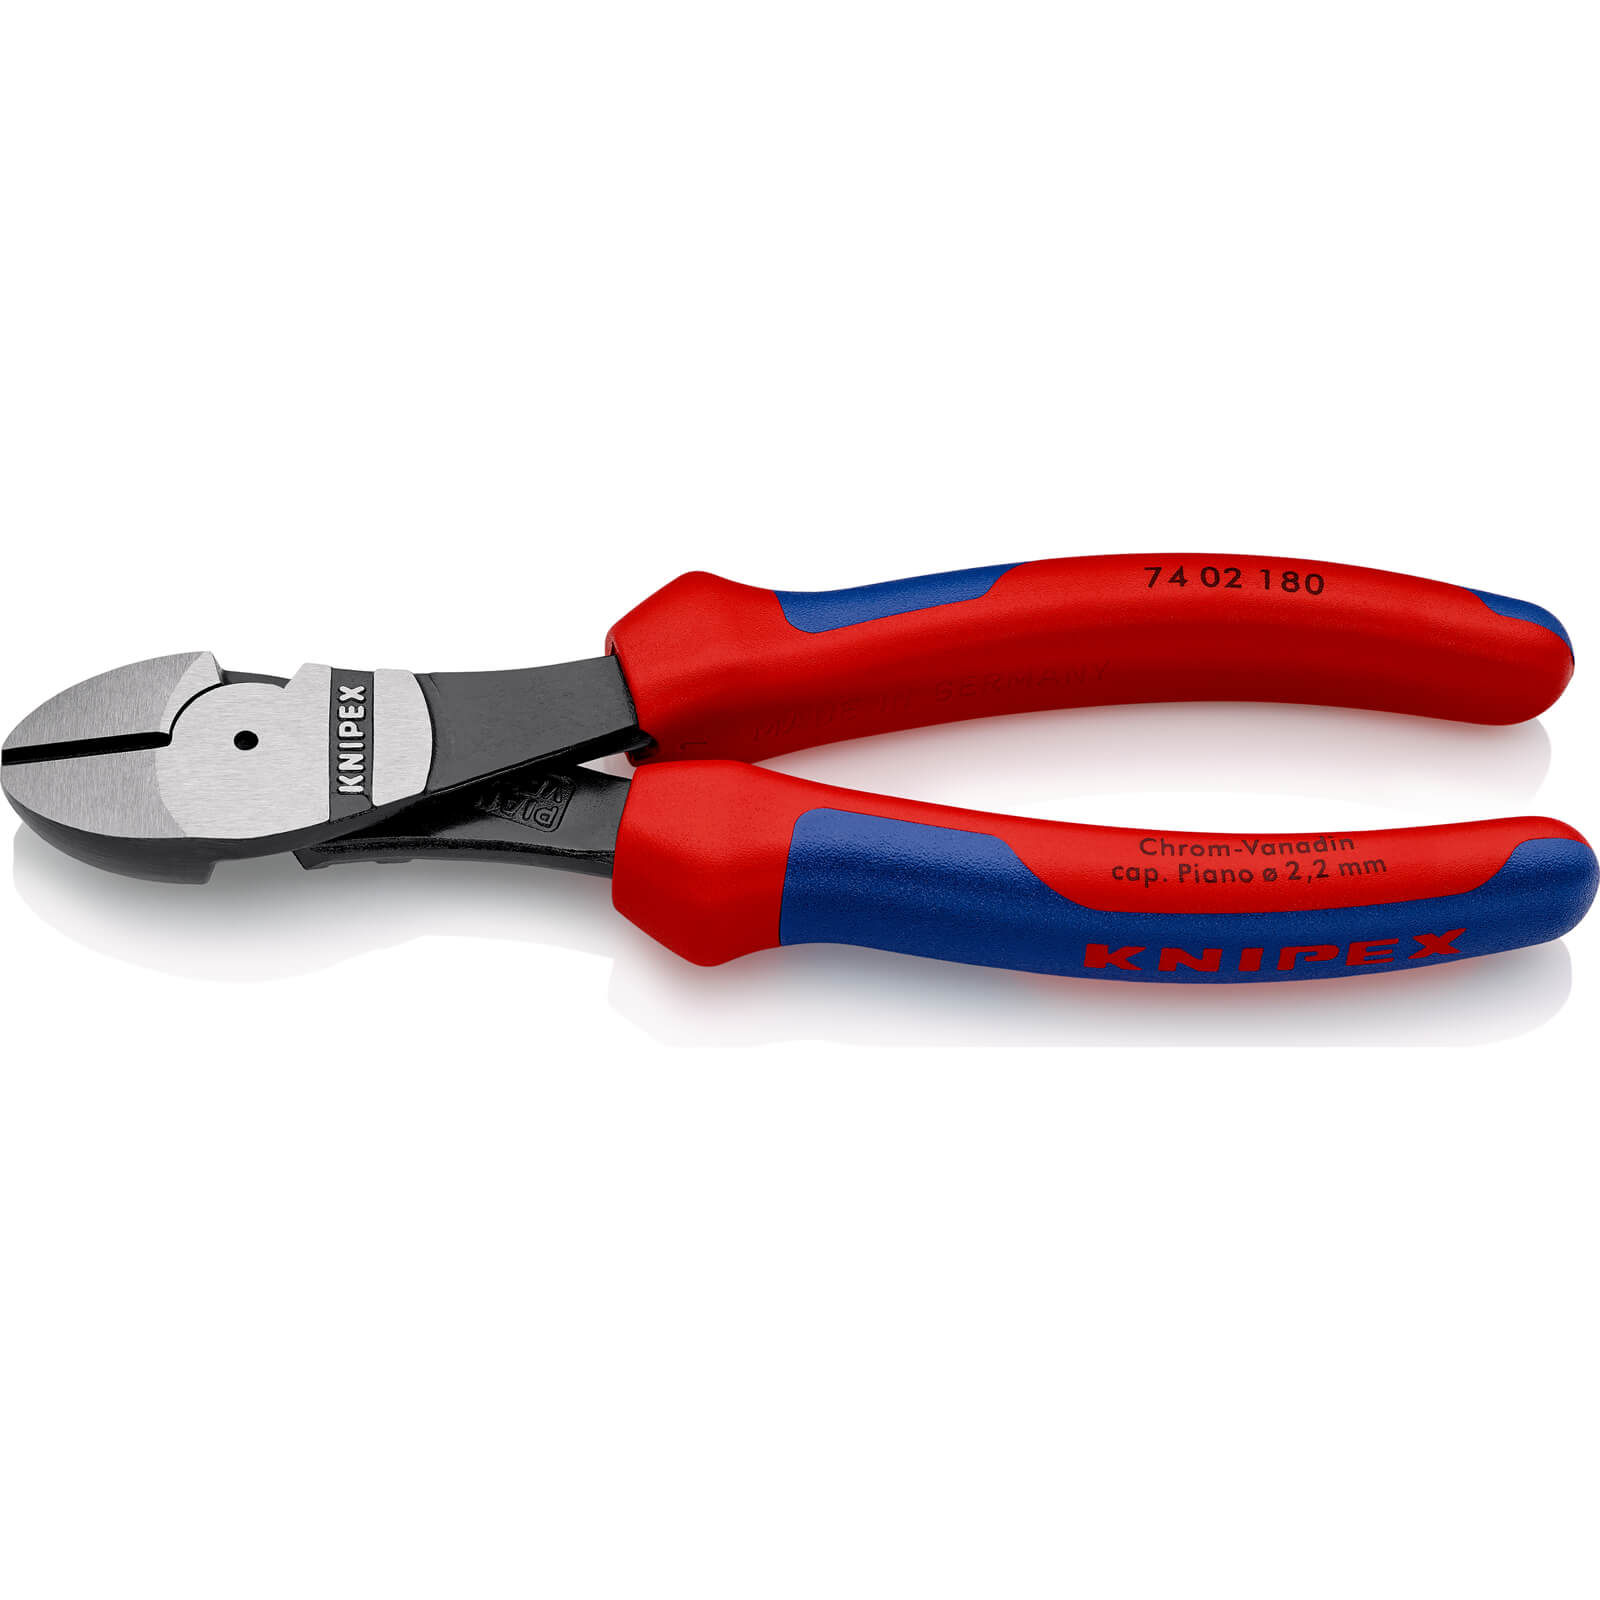 Photo of Knipex 74 02 Diagonal Cutting Pliers 180mm